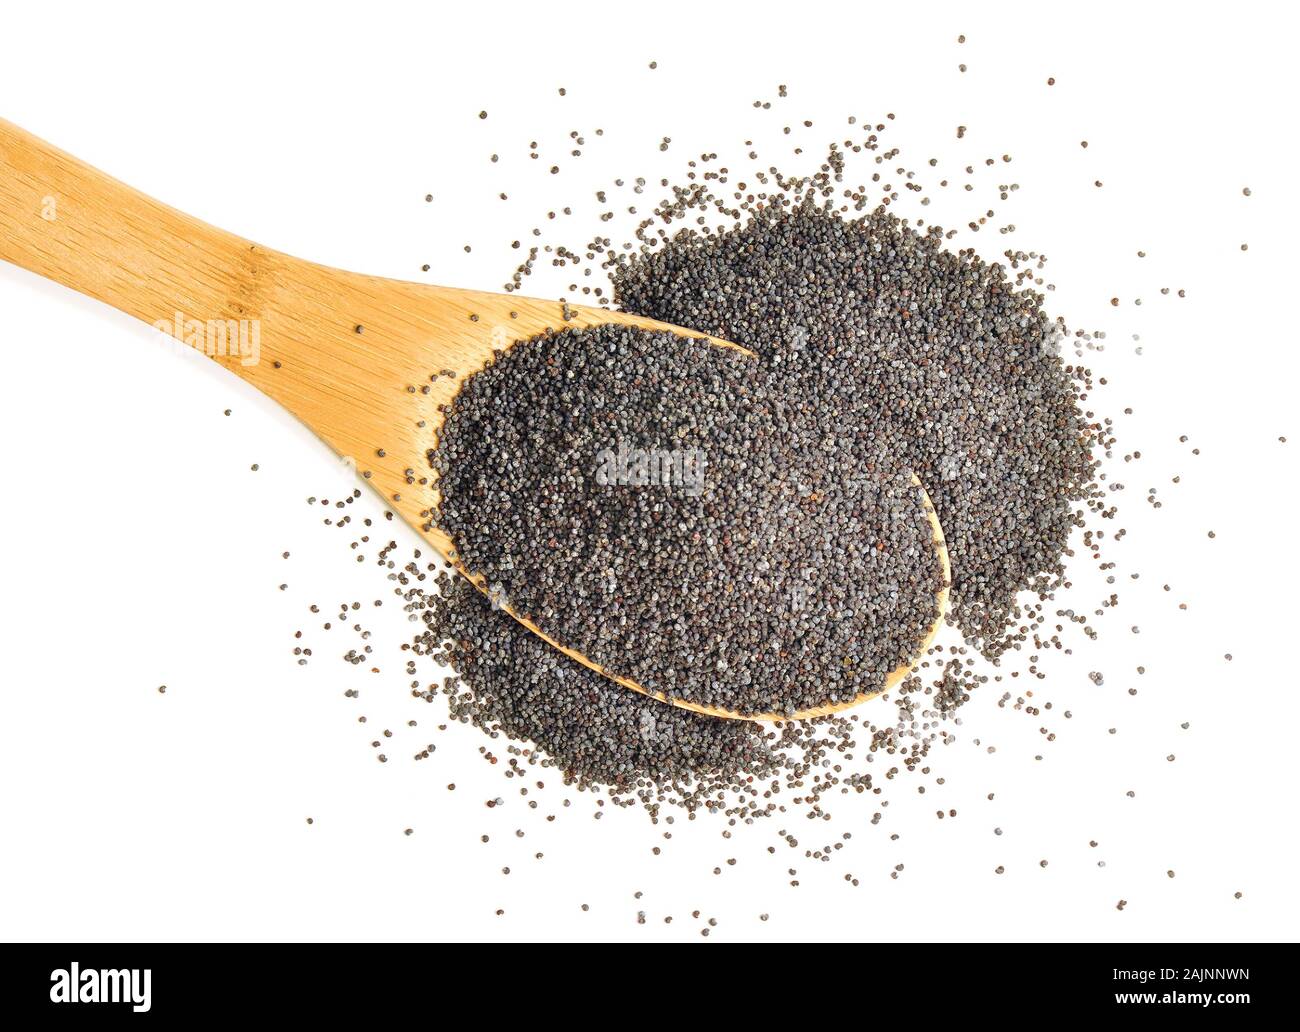 A heaped spoonful of organic poppy seeds on a white background Stock Photo